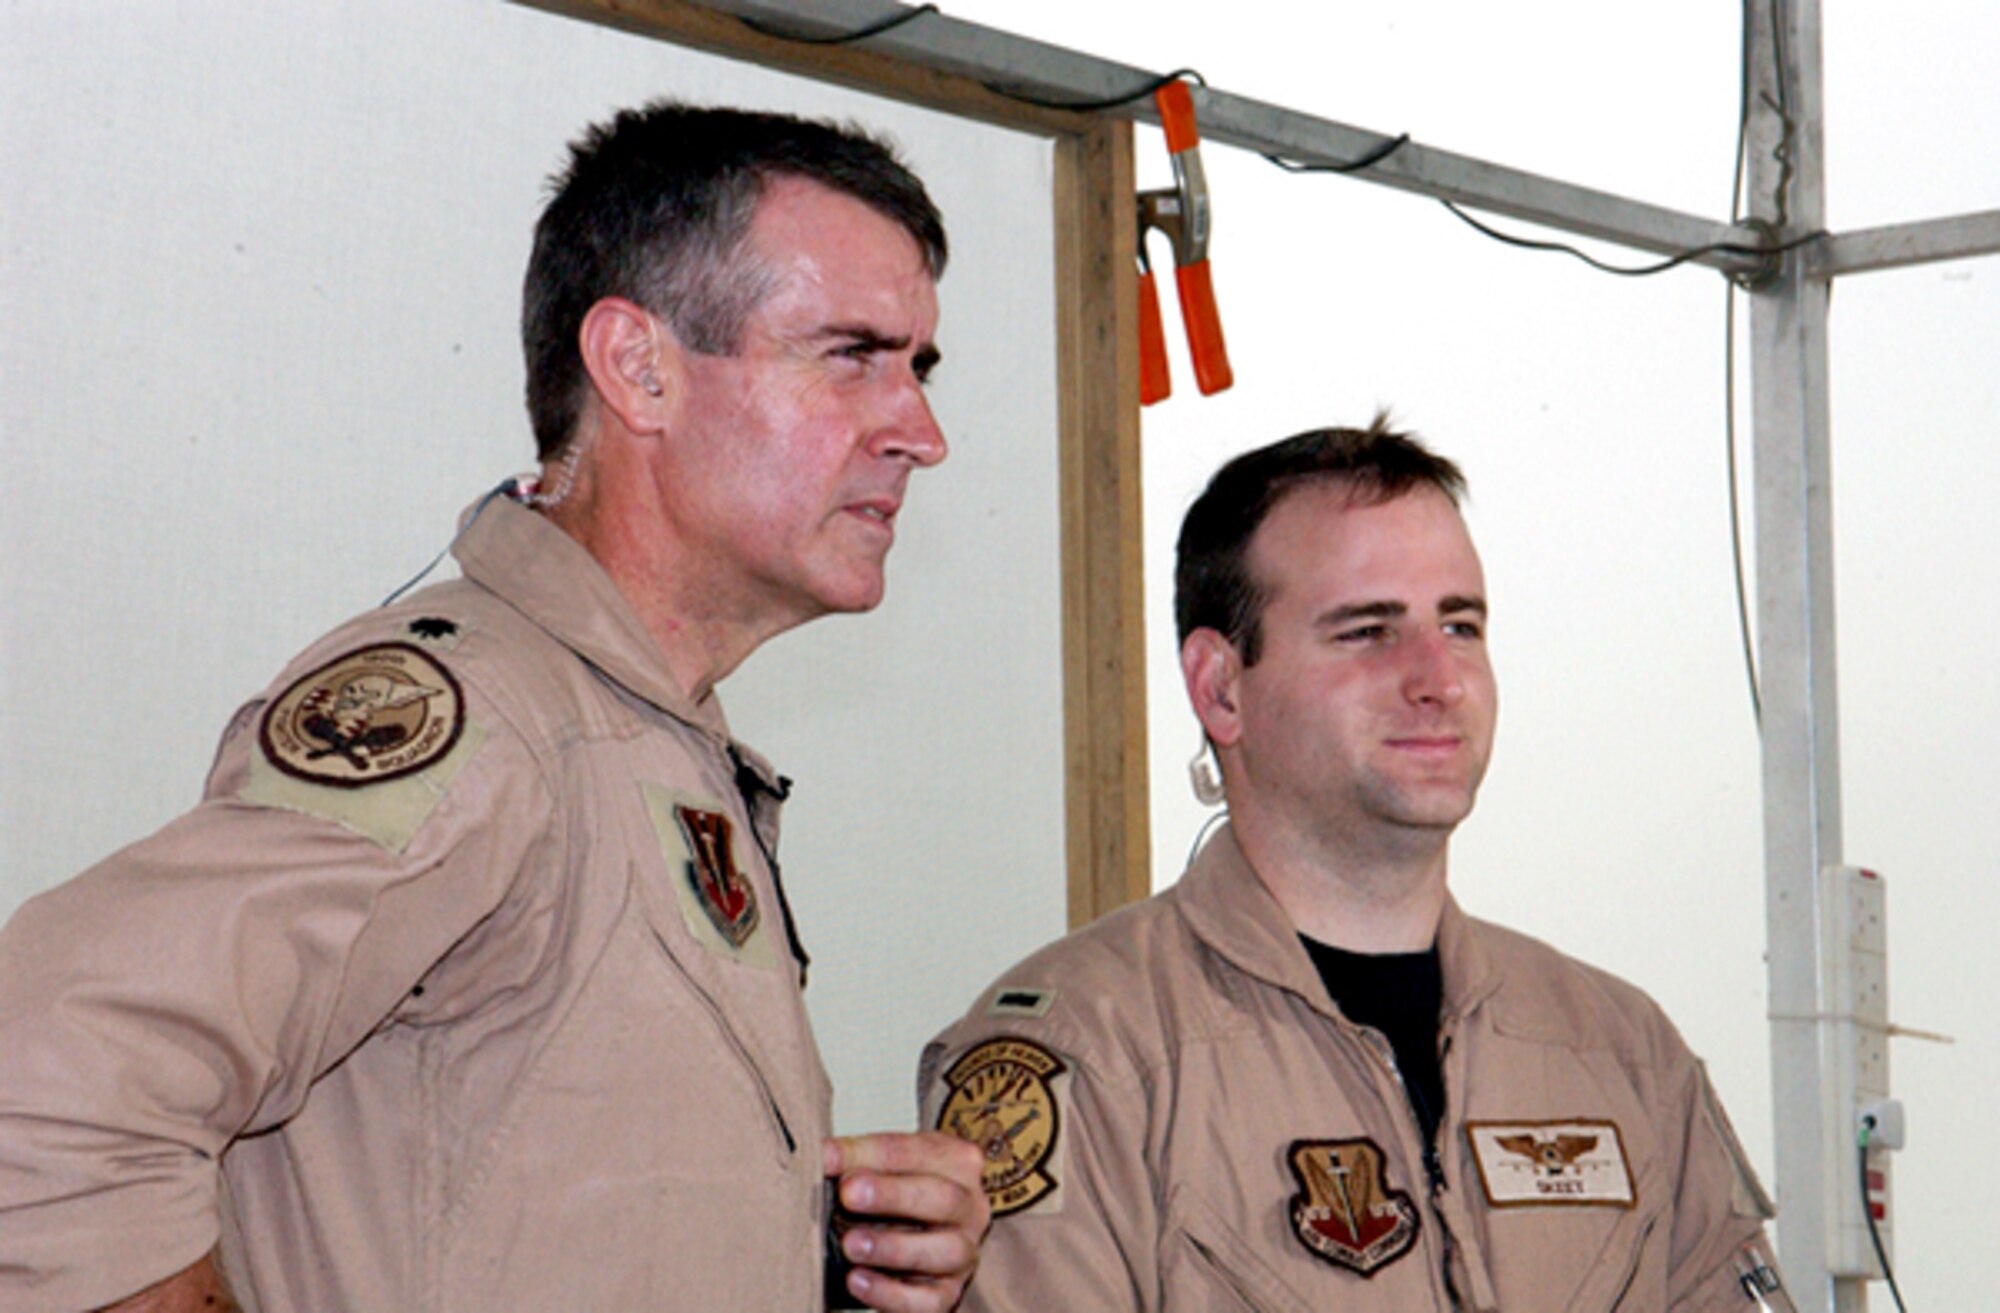 OPERATION IRAQI FREEDOM -- Lt. Col. Mike Webb and 1st Lt. Chad Martin, 332nd Air Expeditionary Wing fighter pilots, answer questions to stateside reporters during a live satellite feed from Kuwait City. (U.S. Air Force Photo by Master Sgt. Stefan Alford)